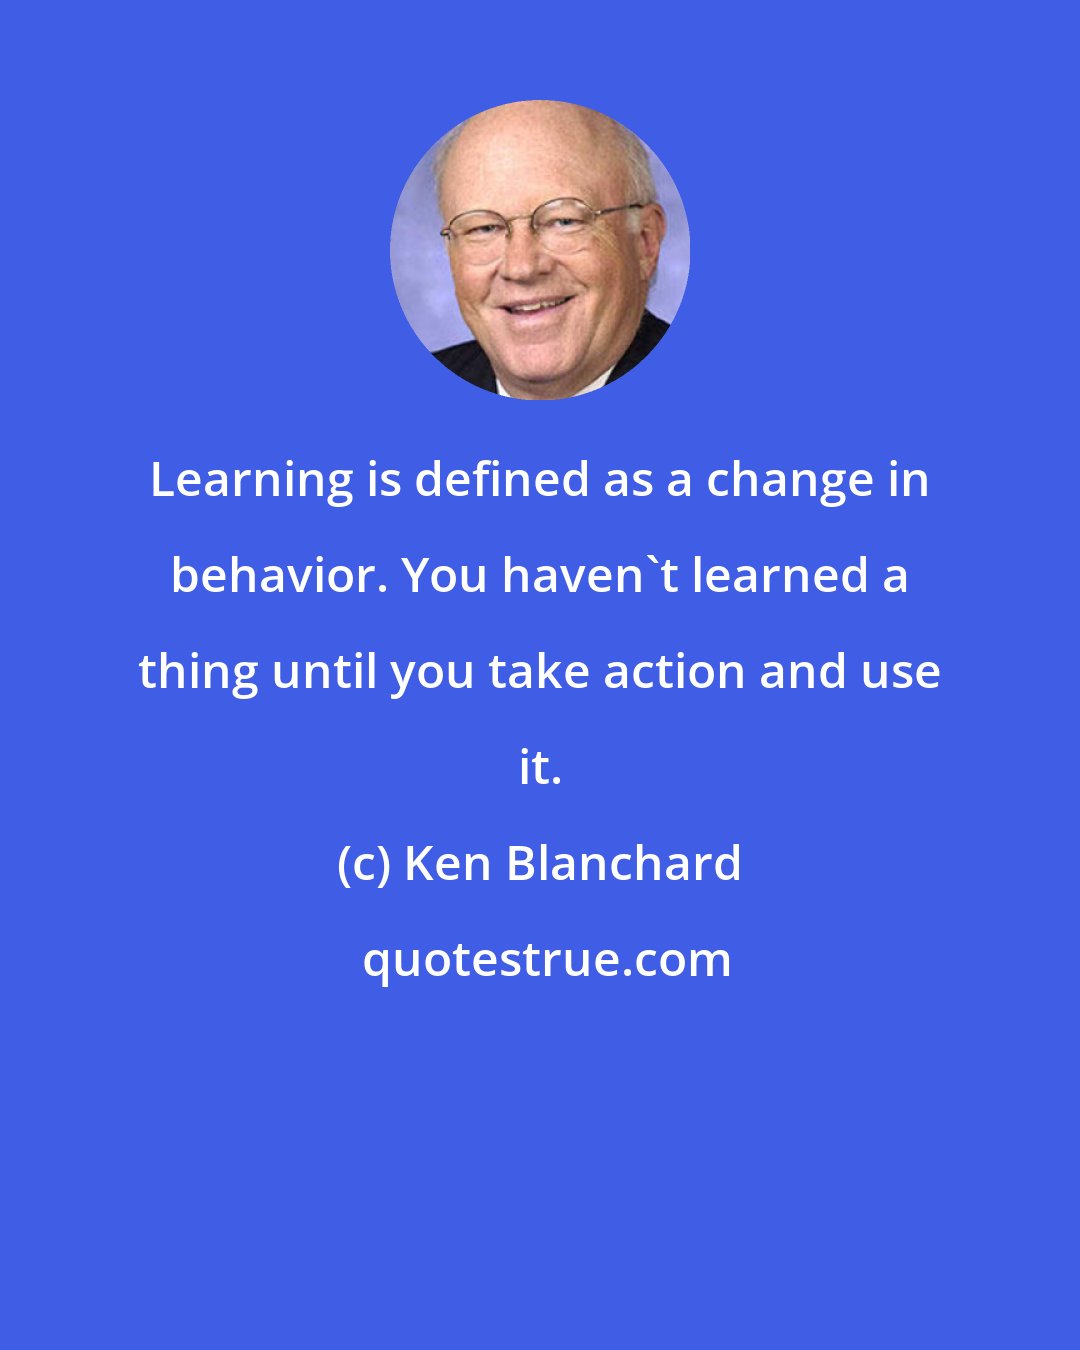 Ken Blanchard: Learning is defined as a change in behavior. You haven't learned a thing until you take action and use it.